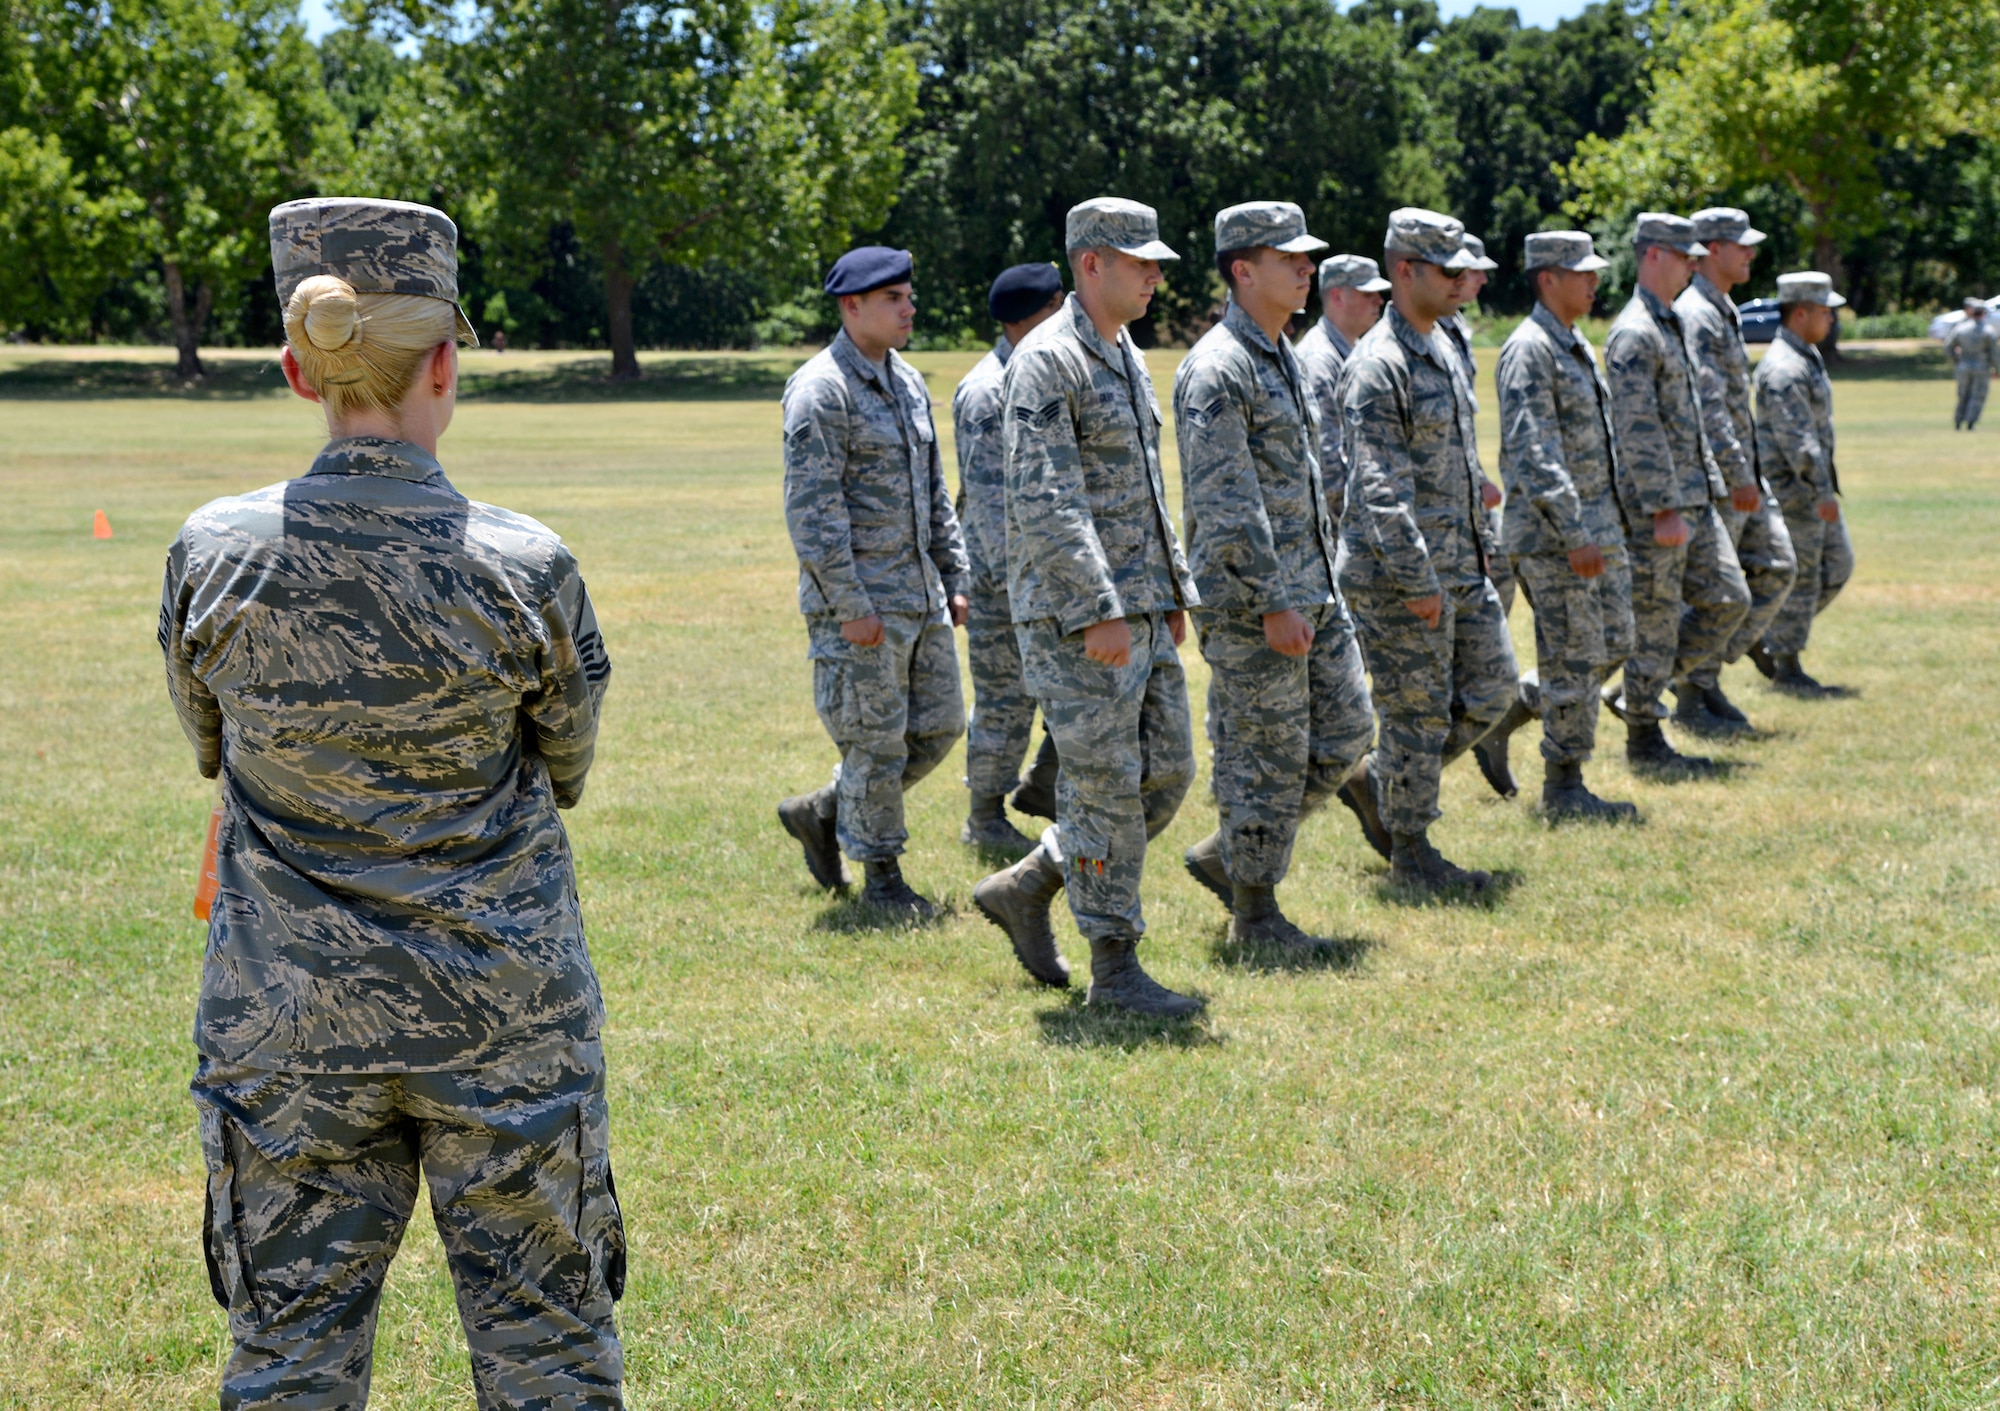 Master Sgt. Rachael Long, one of four Airman Leadership School instructors, evaluates her flight as they display their drill formations. As part of Military Customs and Courtesies curriculum, the students spend numerous hours practicing for their drill evaluations. Each student has the opportunity to lead their flight, calling out drill commands around the field beside the ALS schoolhouse. The flights practice on their own time, leading up to the practice evaluation with their instructor, allowing time to correct and hone their skills until the day of their final evaluation. This part of their curriculum helps the students refresh skills they may not have used since basic training and understand the importance of a practice rich in military history and tradition. (Air Force photo by Kelly White)